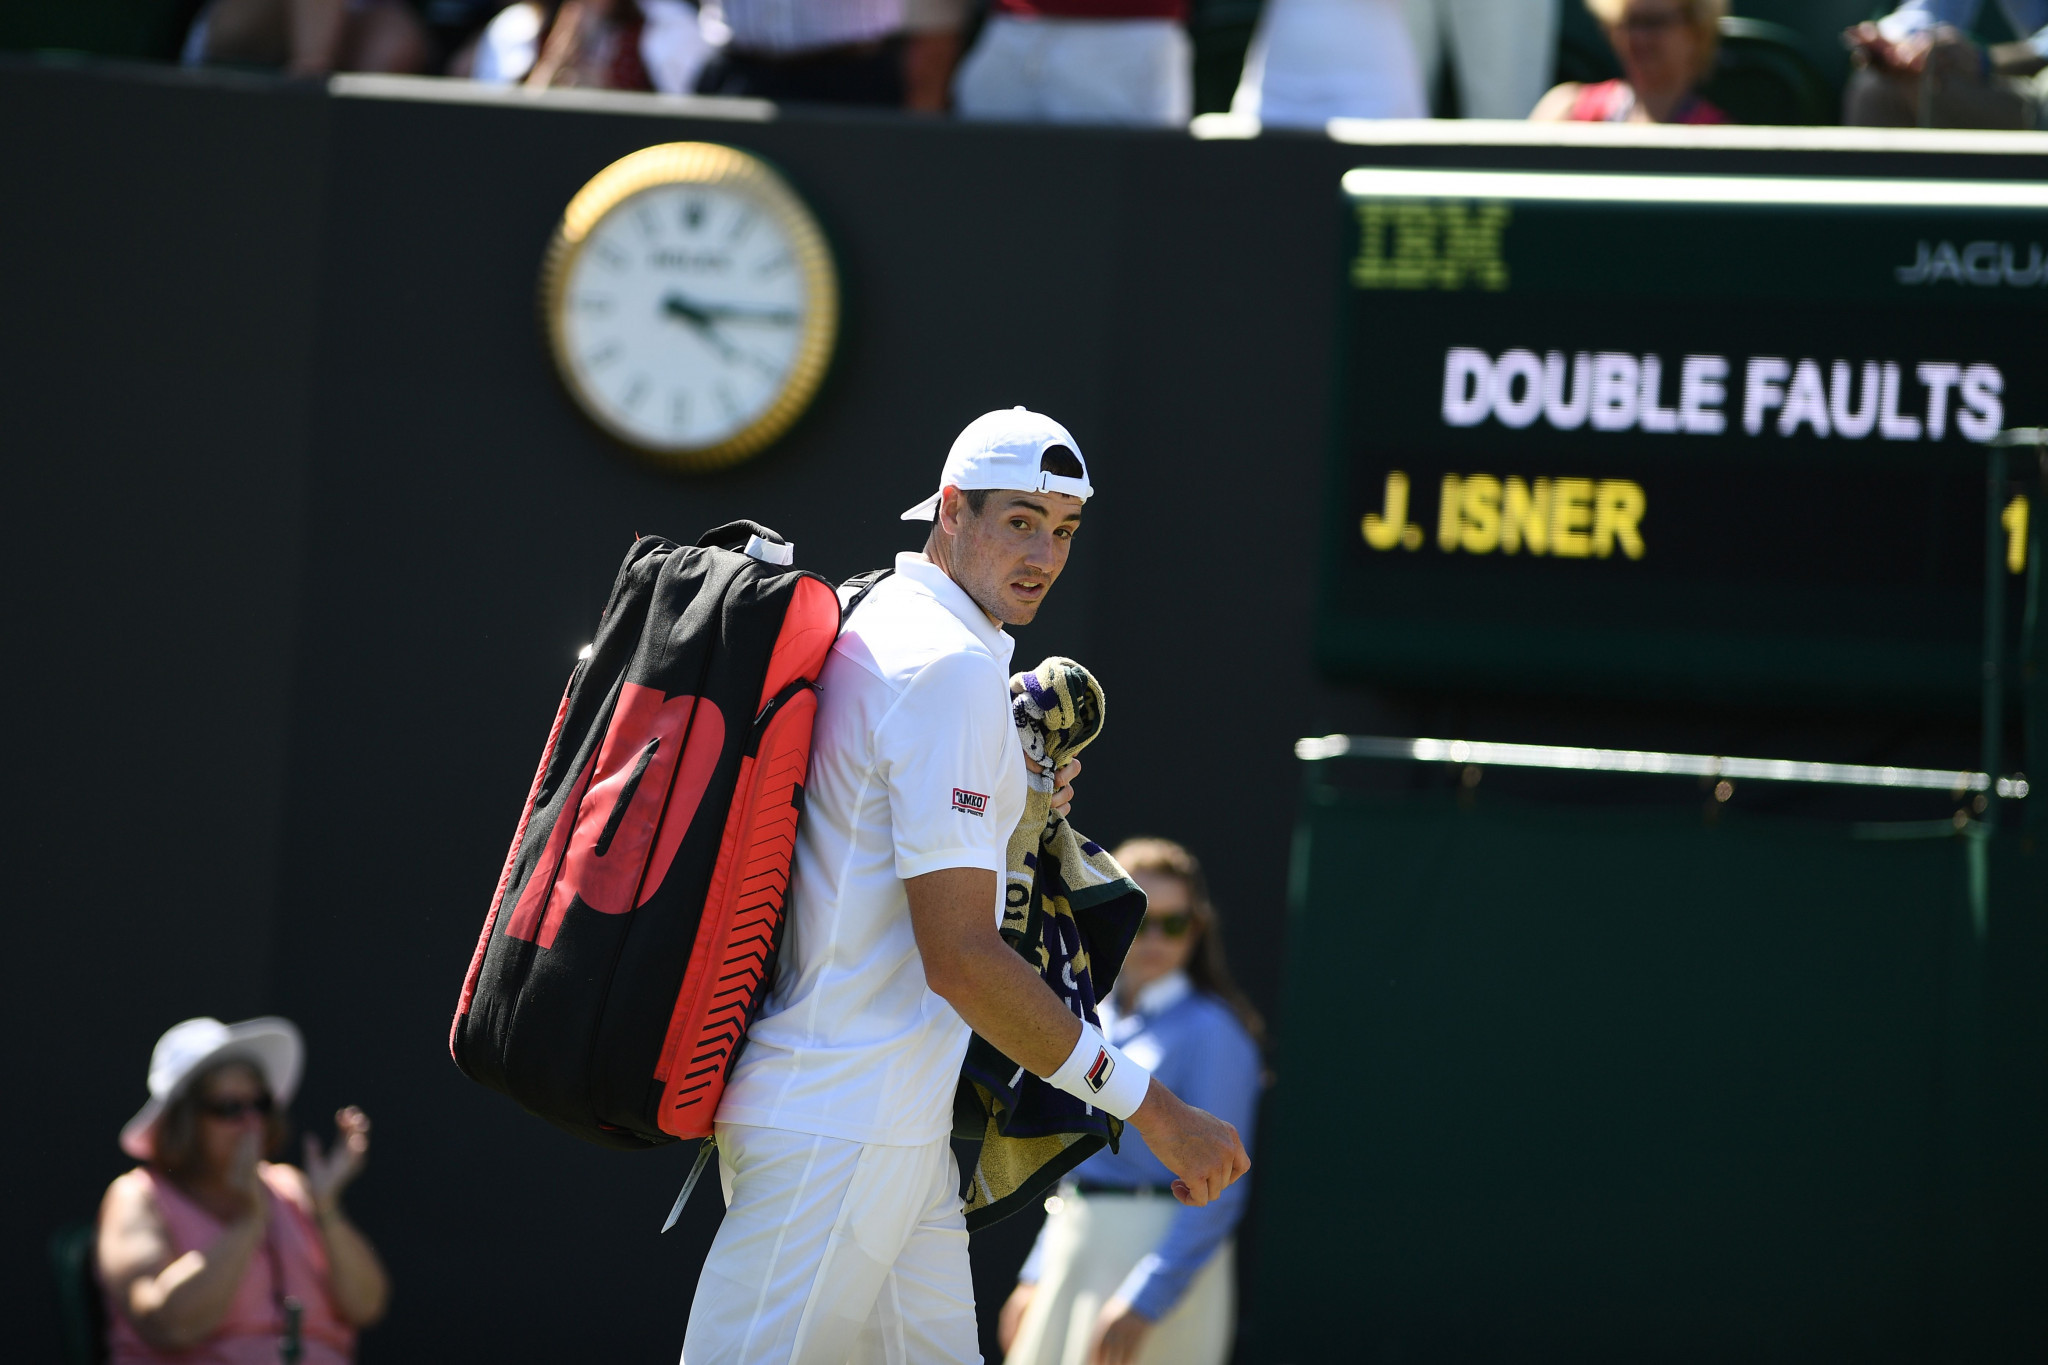 Ninth seed John Isner was sent packing by Mikhail Kukushkin ©Getty Images